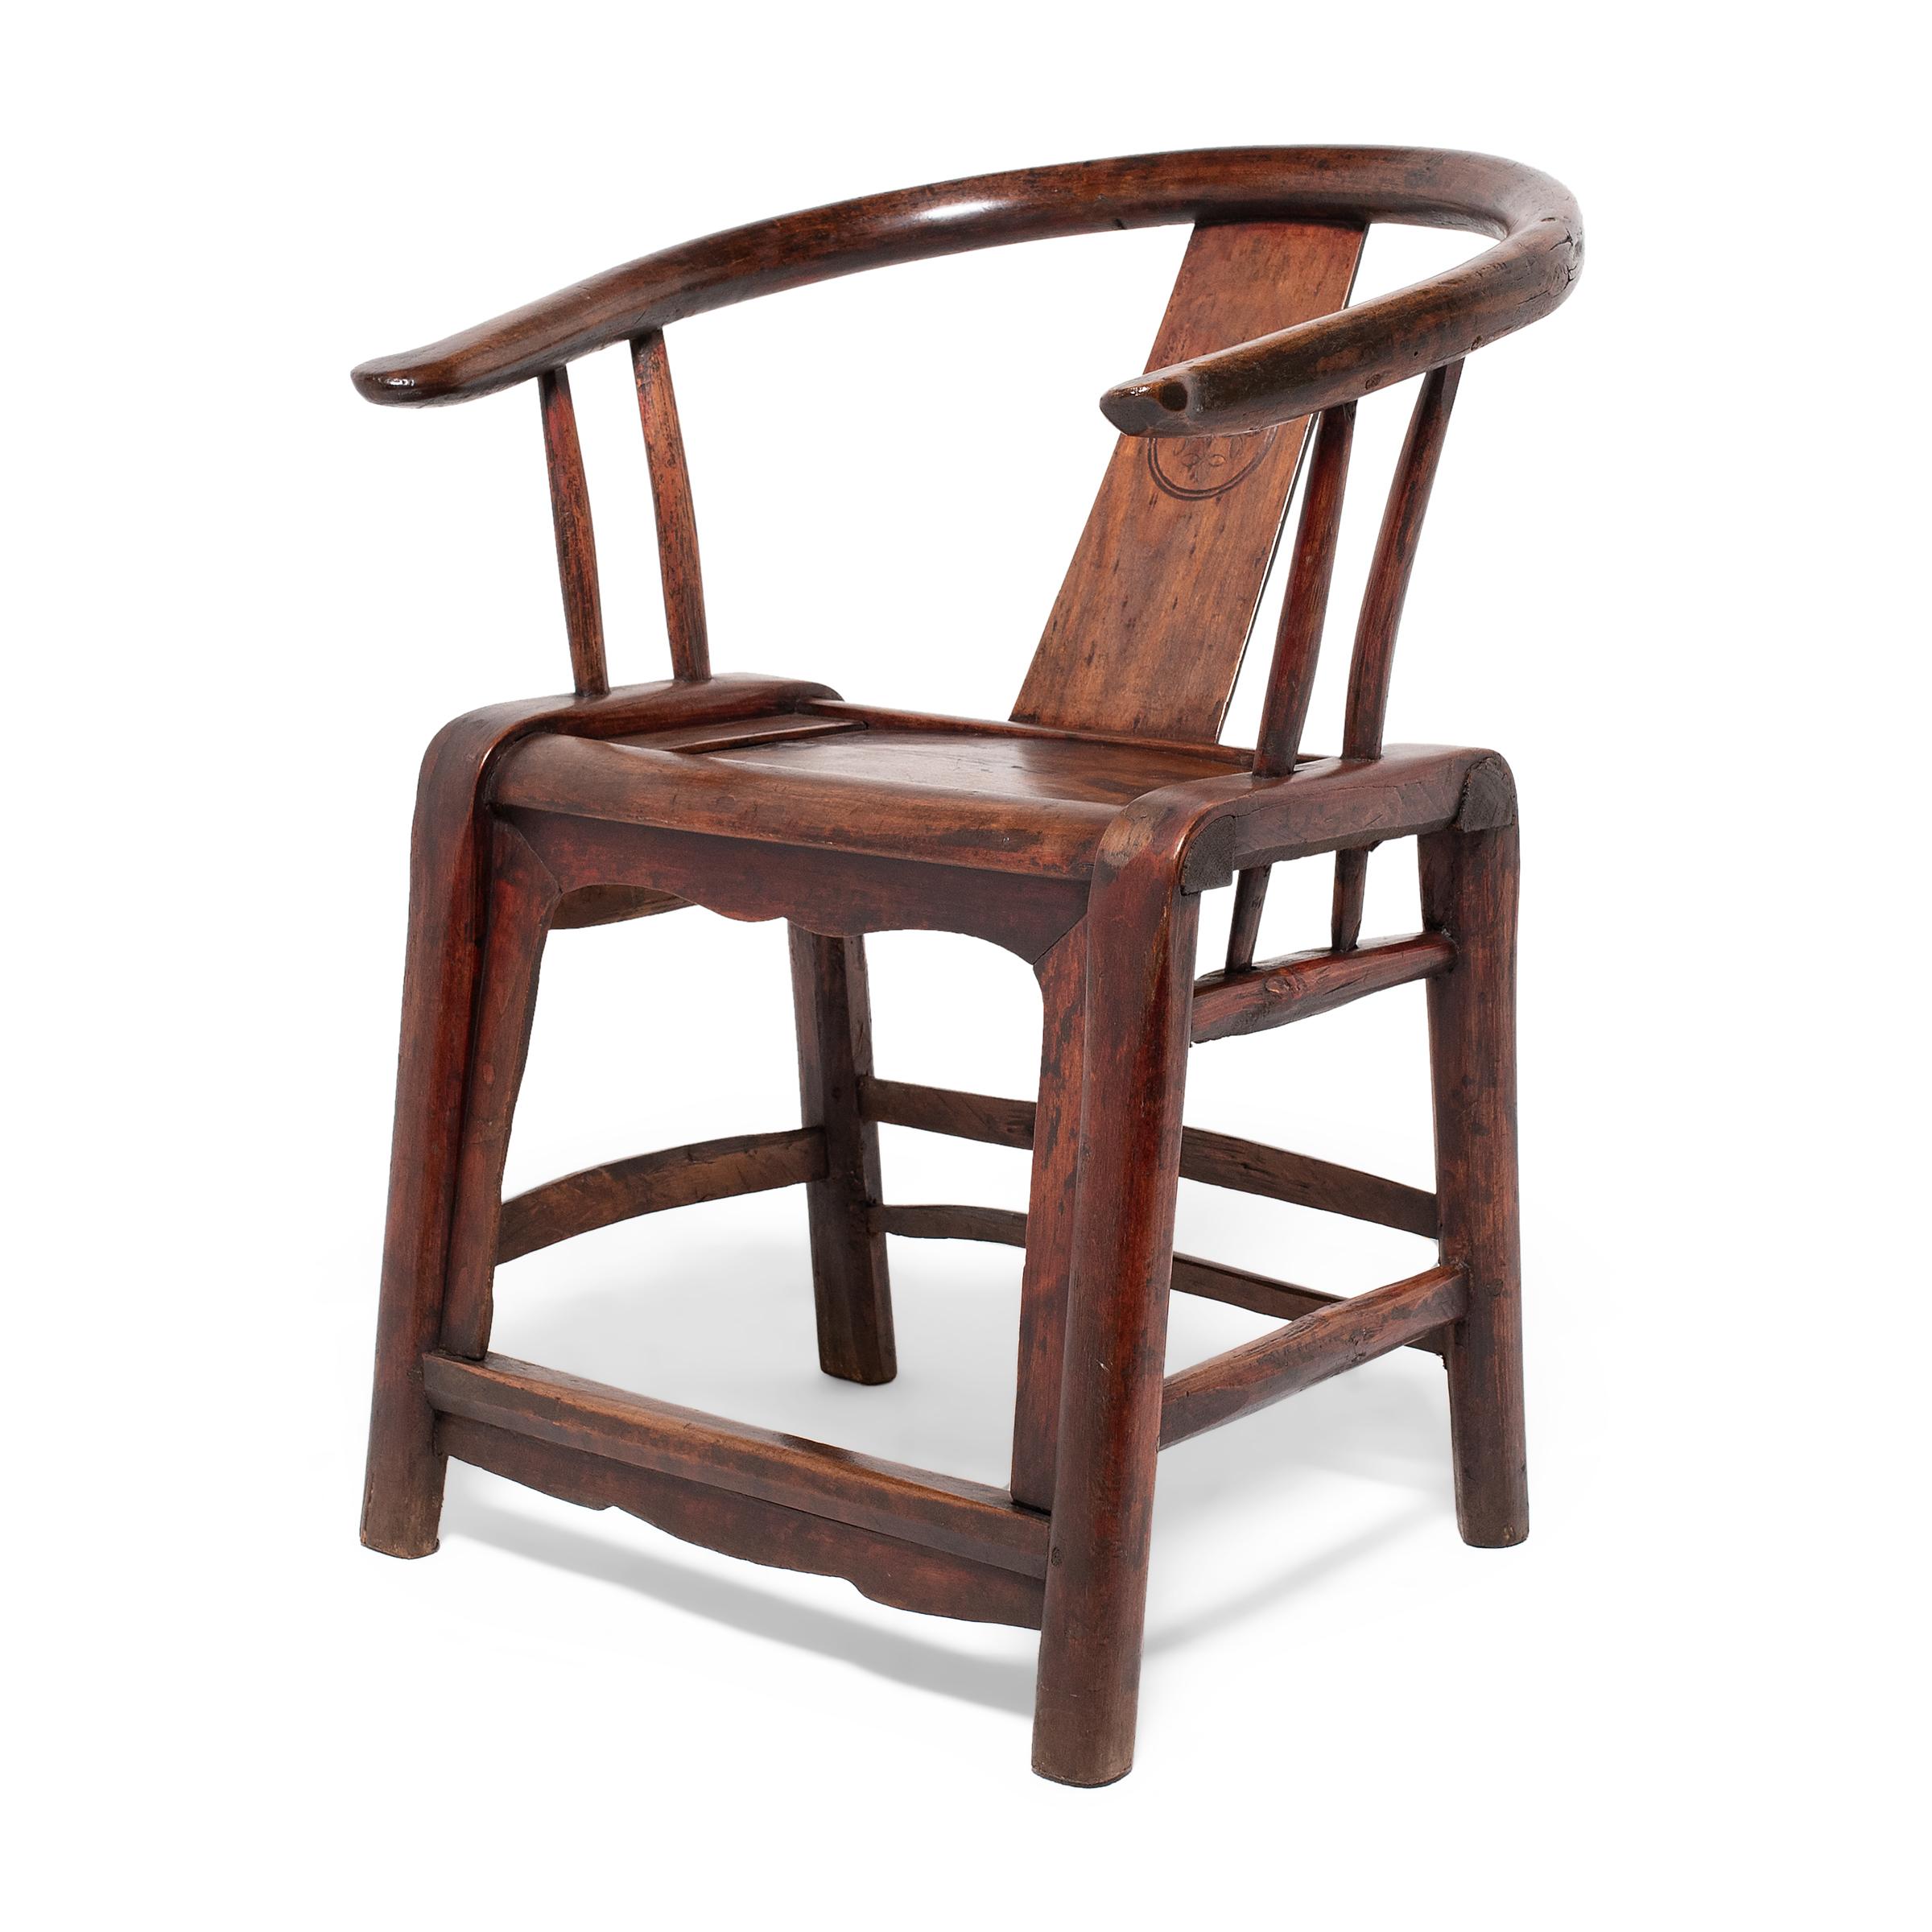 Qing Chinese Lacquered Roundback Chair, c. 1850 For Sale